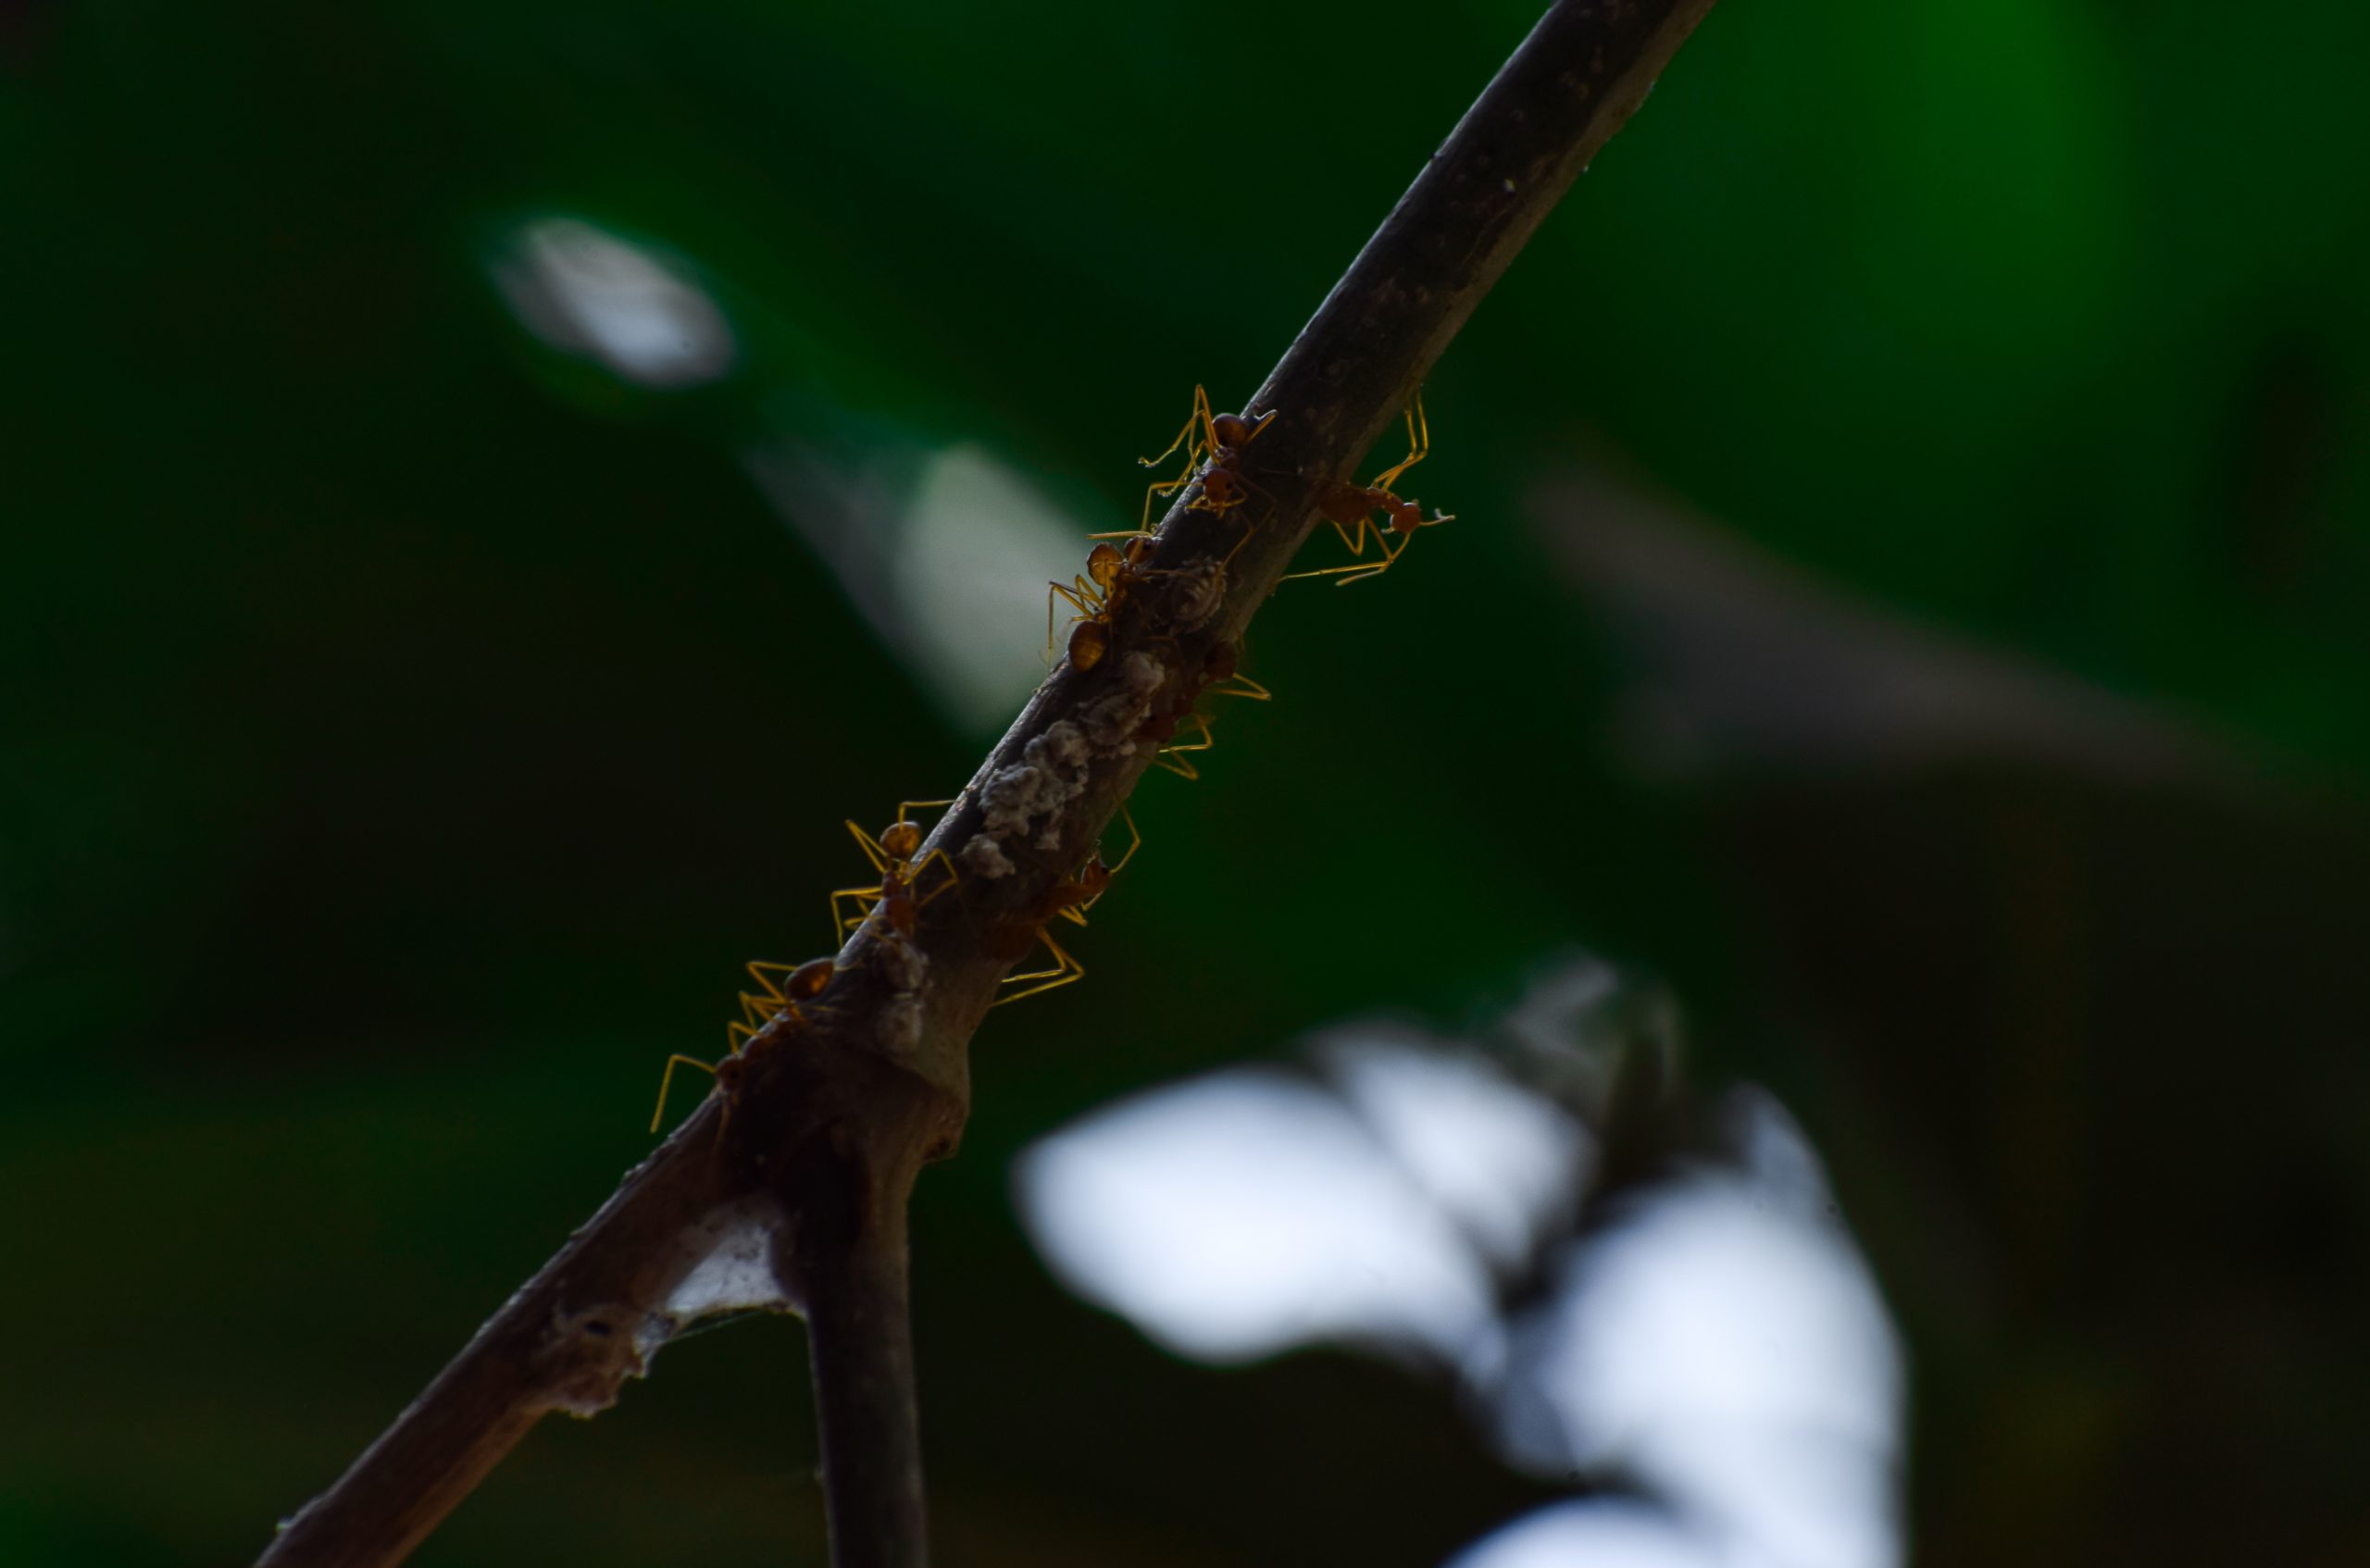 Ants on a twig